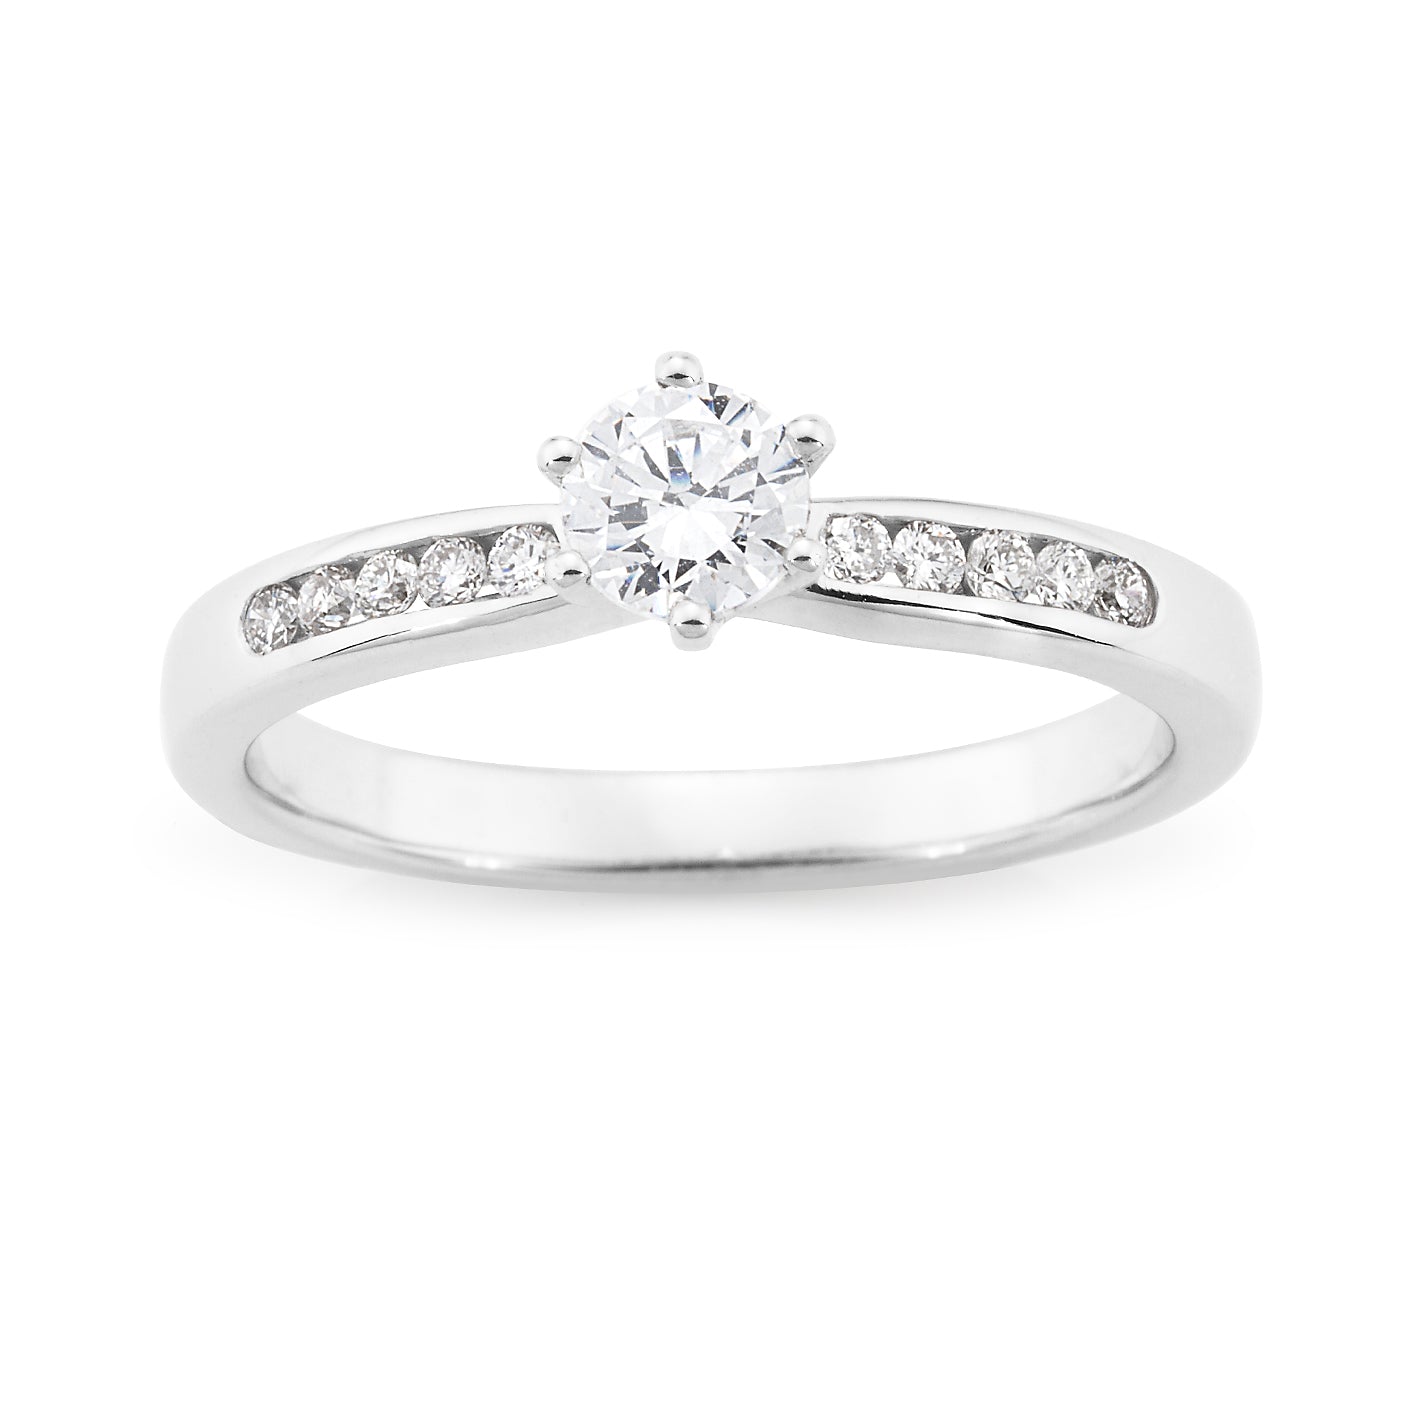 9ct White Gold Diamond 6 Claw Engagement Ring